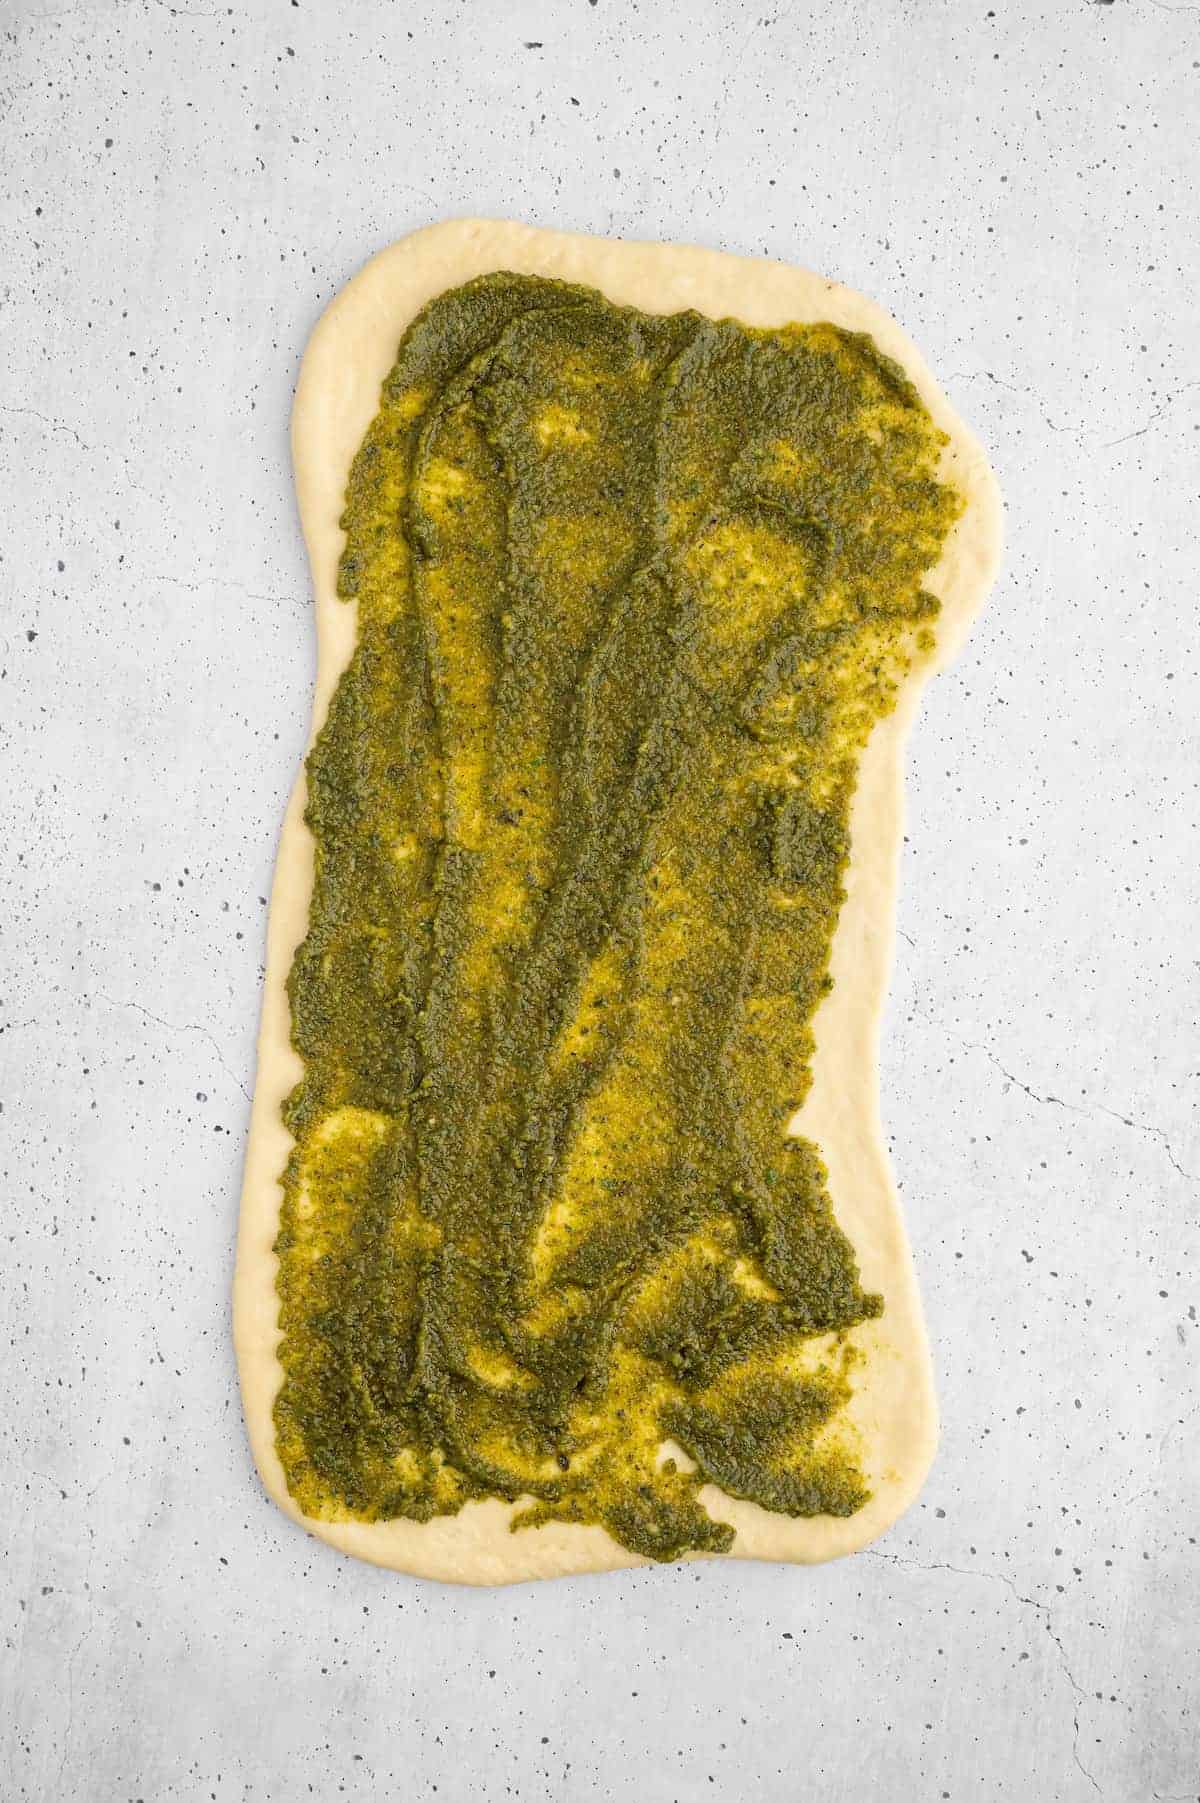 Walnut pesto spread onto a piece of rolled out dough.